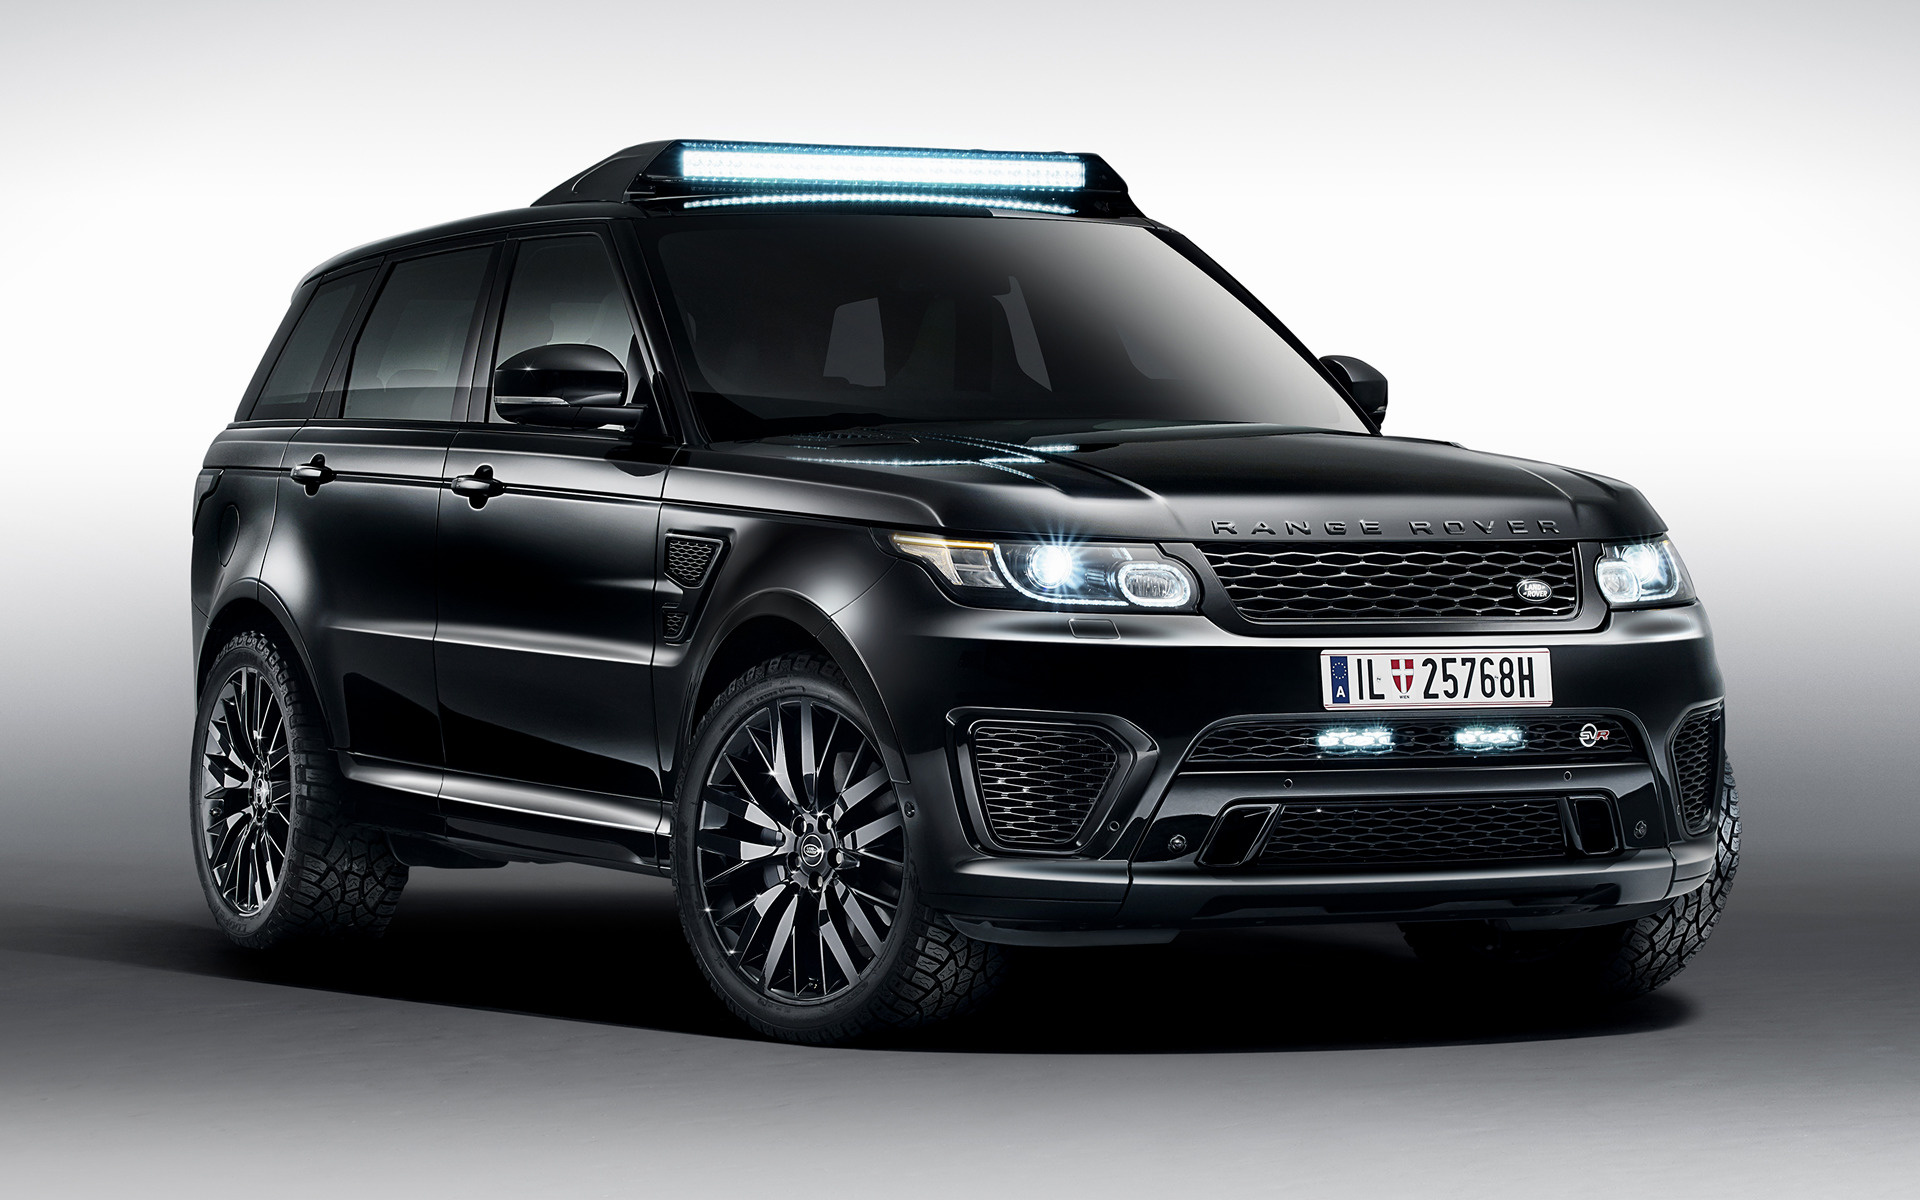 2015 Range Rover Sport SVR 007 Spectre - Wallpapers and HD Images | Car